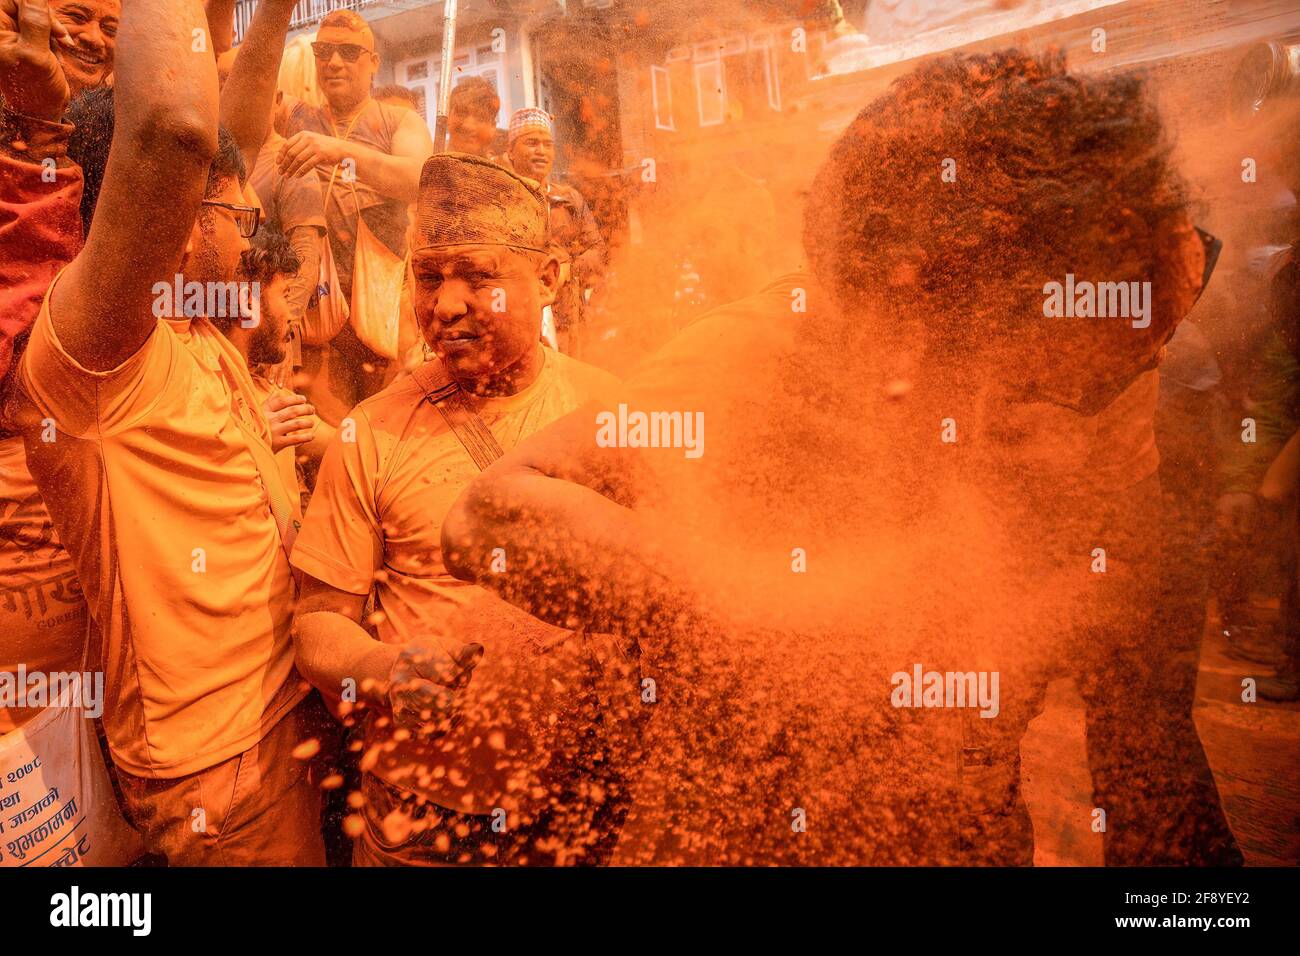 Bhaktapur, Nepal. 15th Apr, 2021. Devotees covered in vermilion powder celebrate "Sindoor Jatra" vermillion powder festival. Revelers carried chariots of the Hindu gods and goddesses and hurled vermillion powder onto each other as part of the celebrations commencing Nepalese New Year. Credit: SOPA Images Limited/Alamy Live News Stock Photo